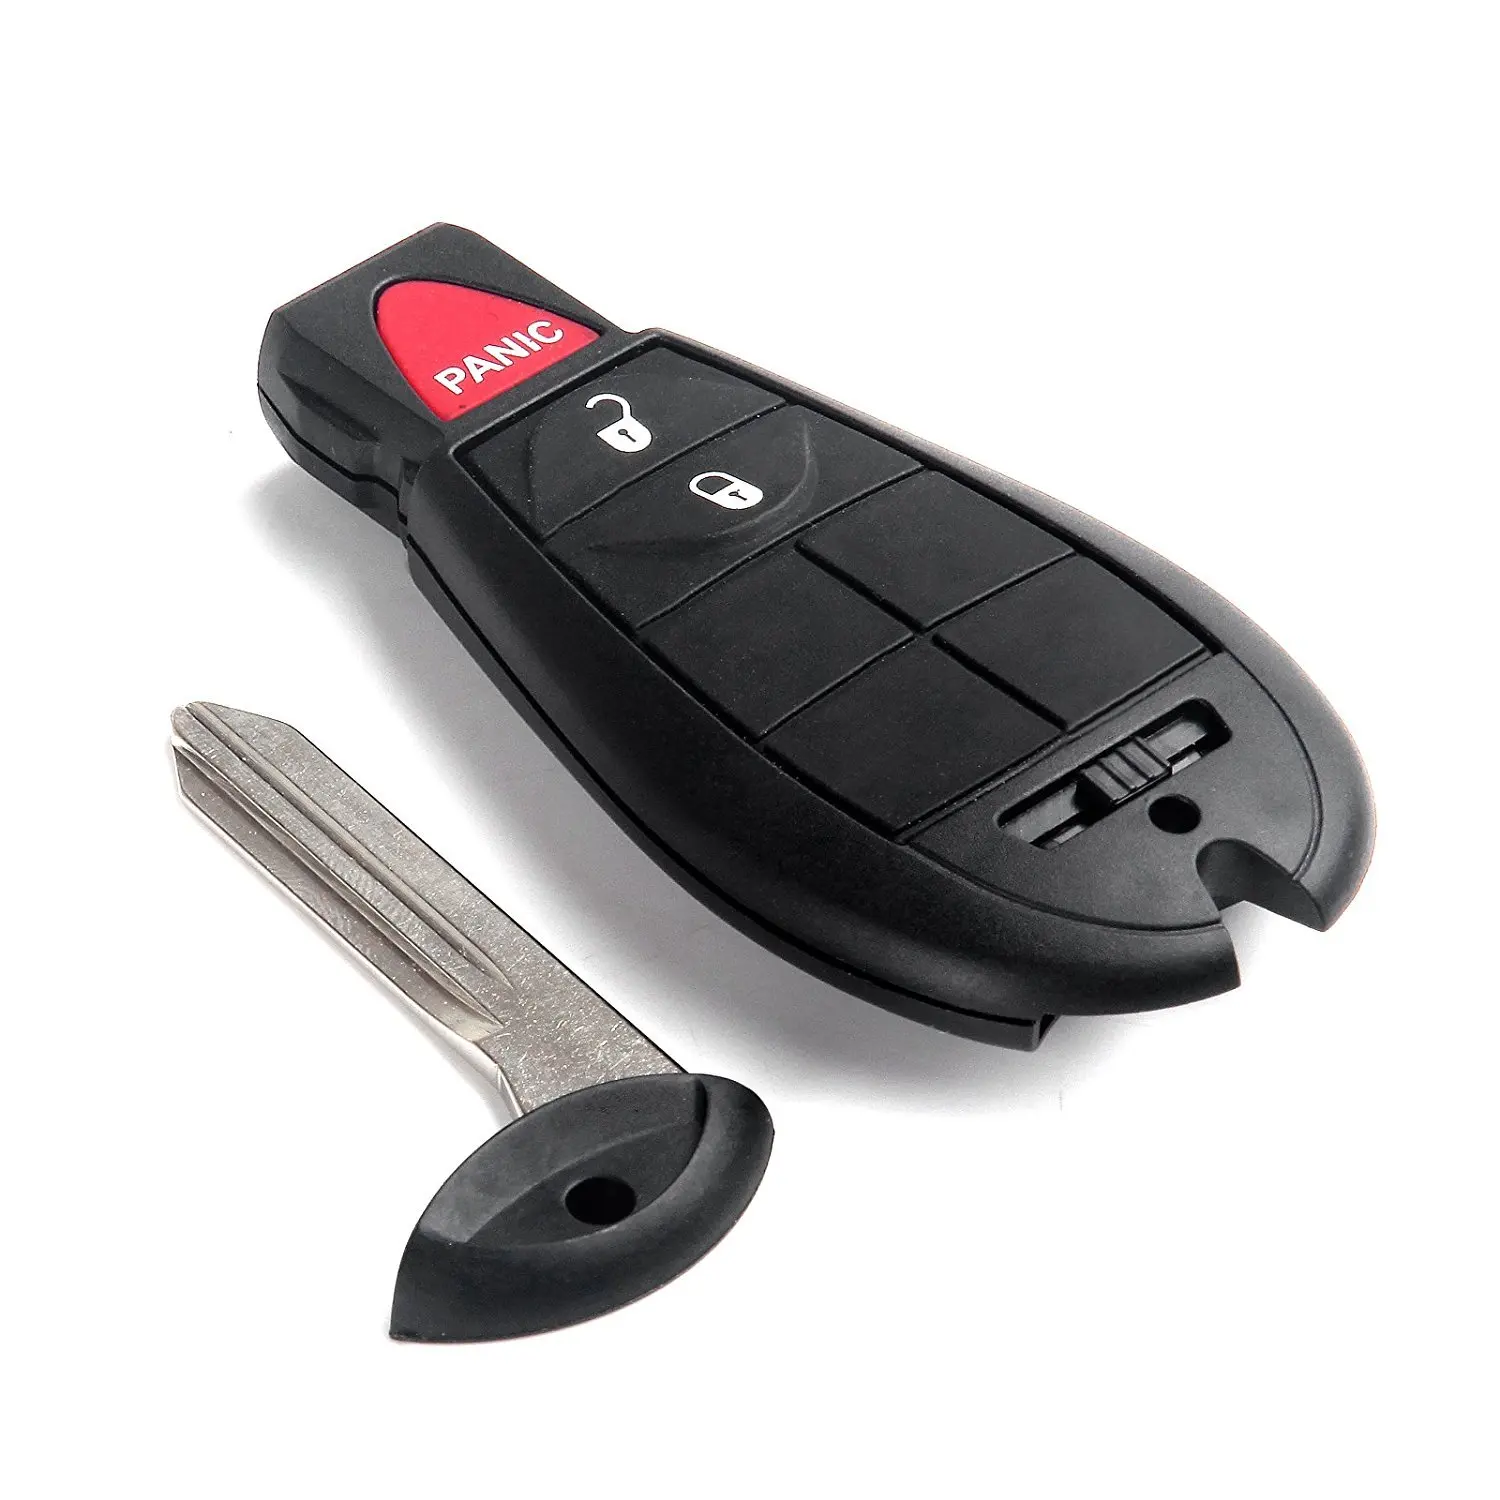 dodge key fob replacement near me